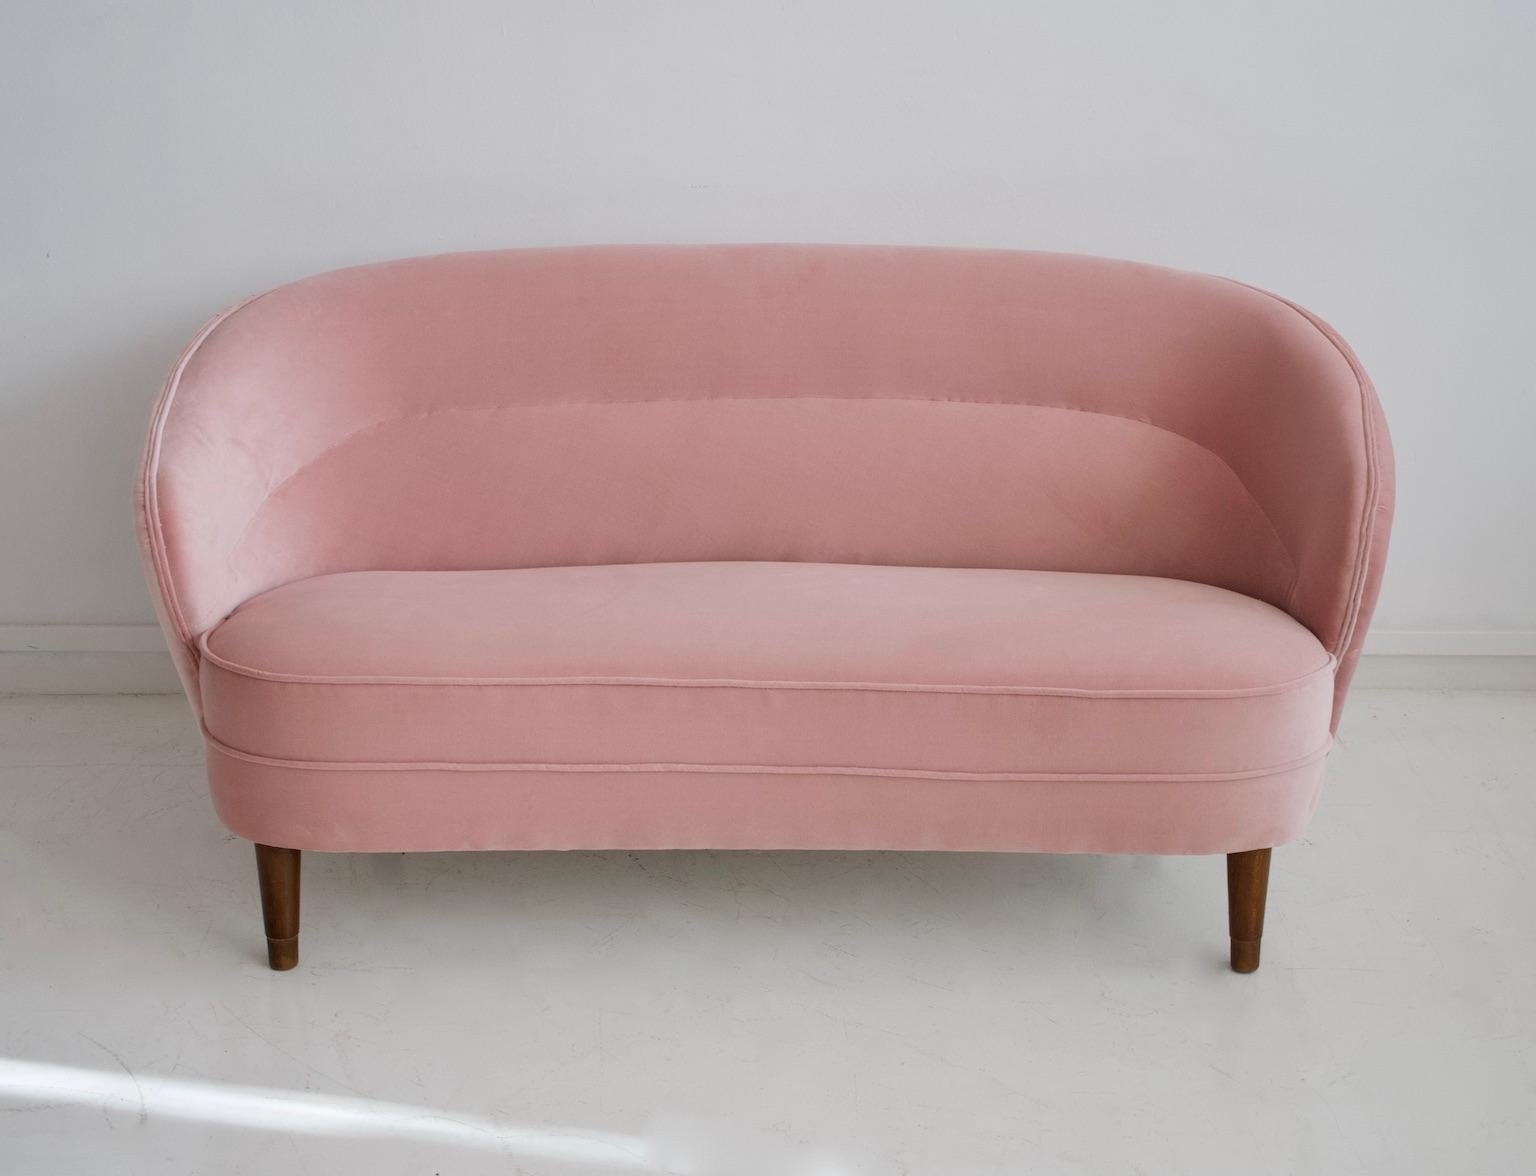 Slightly curved sofa with legs of stained beech from circa 1940s. Made by a Danish furniture producer. Reupholstered in light pink velvet.